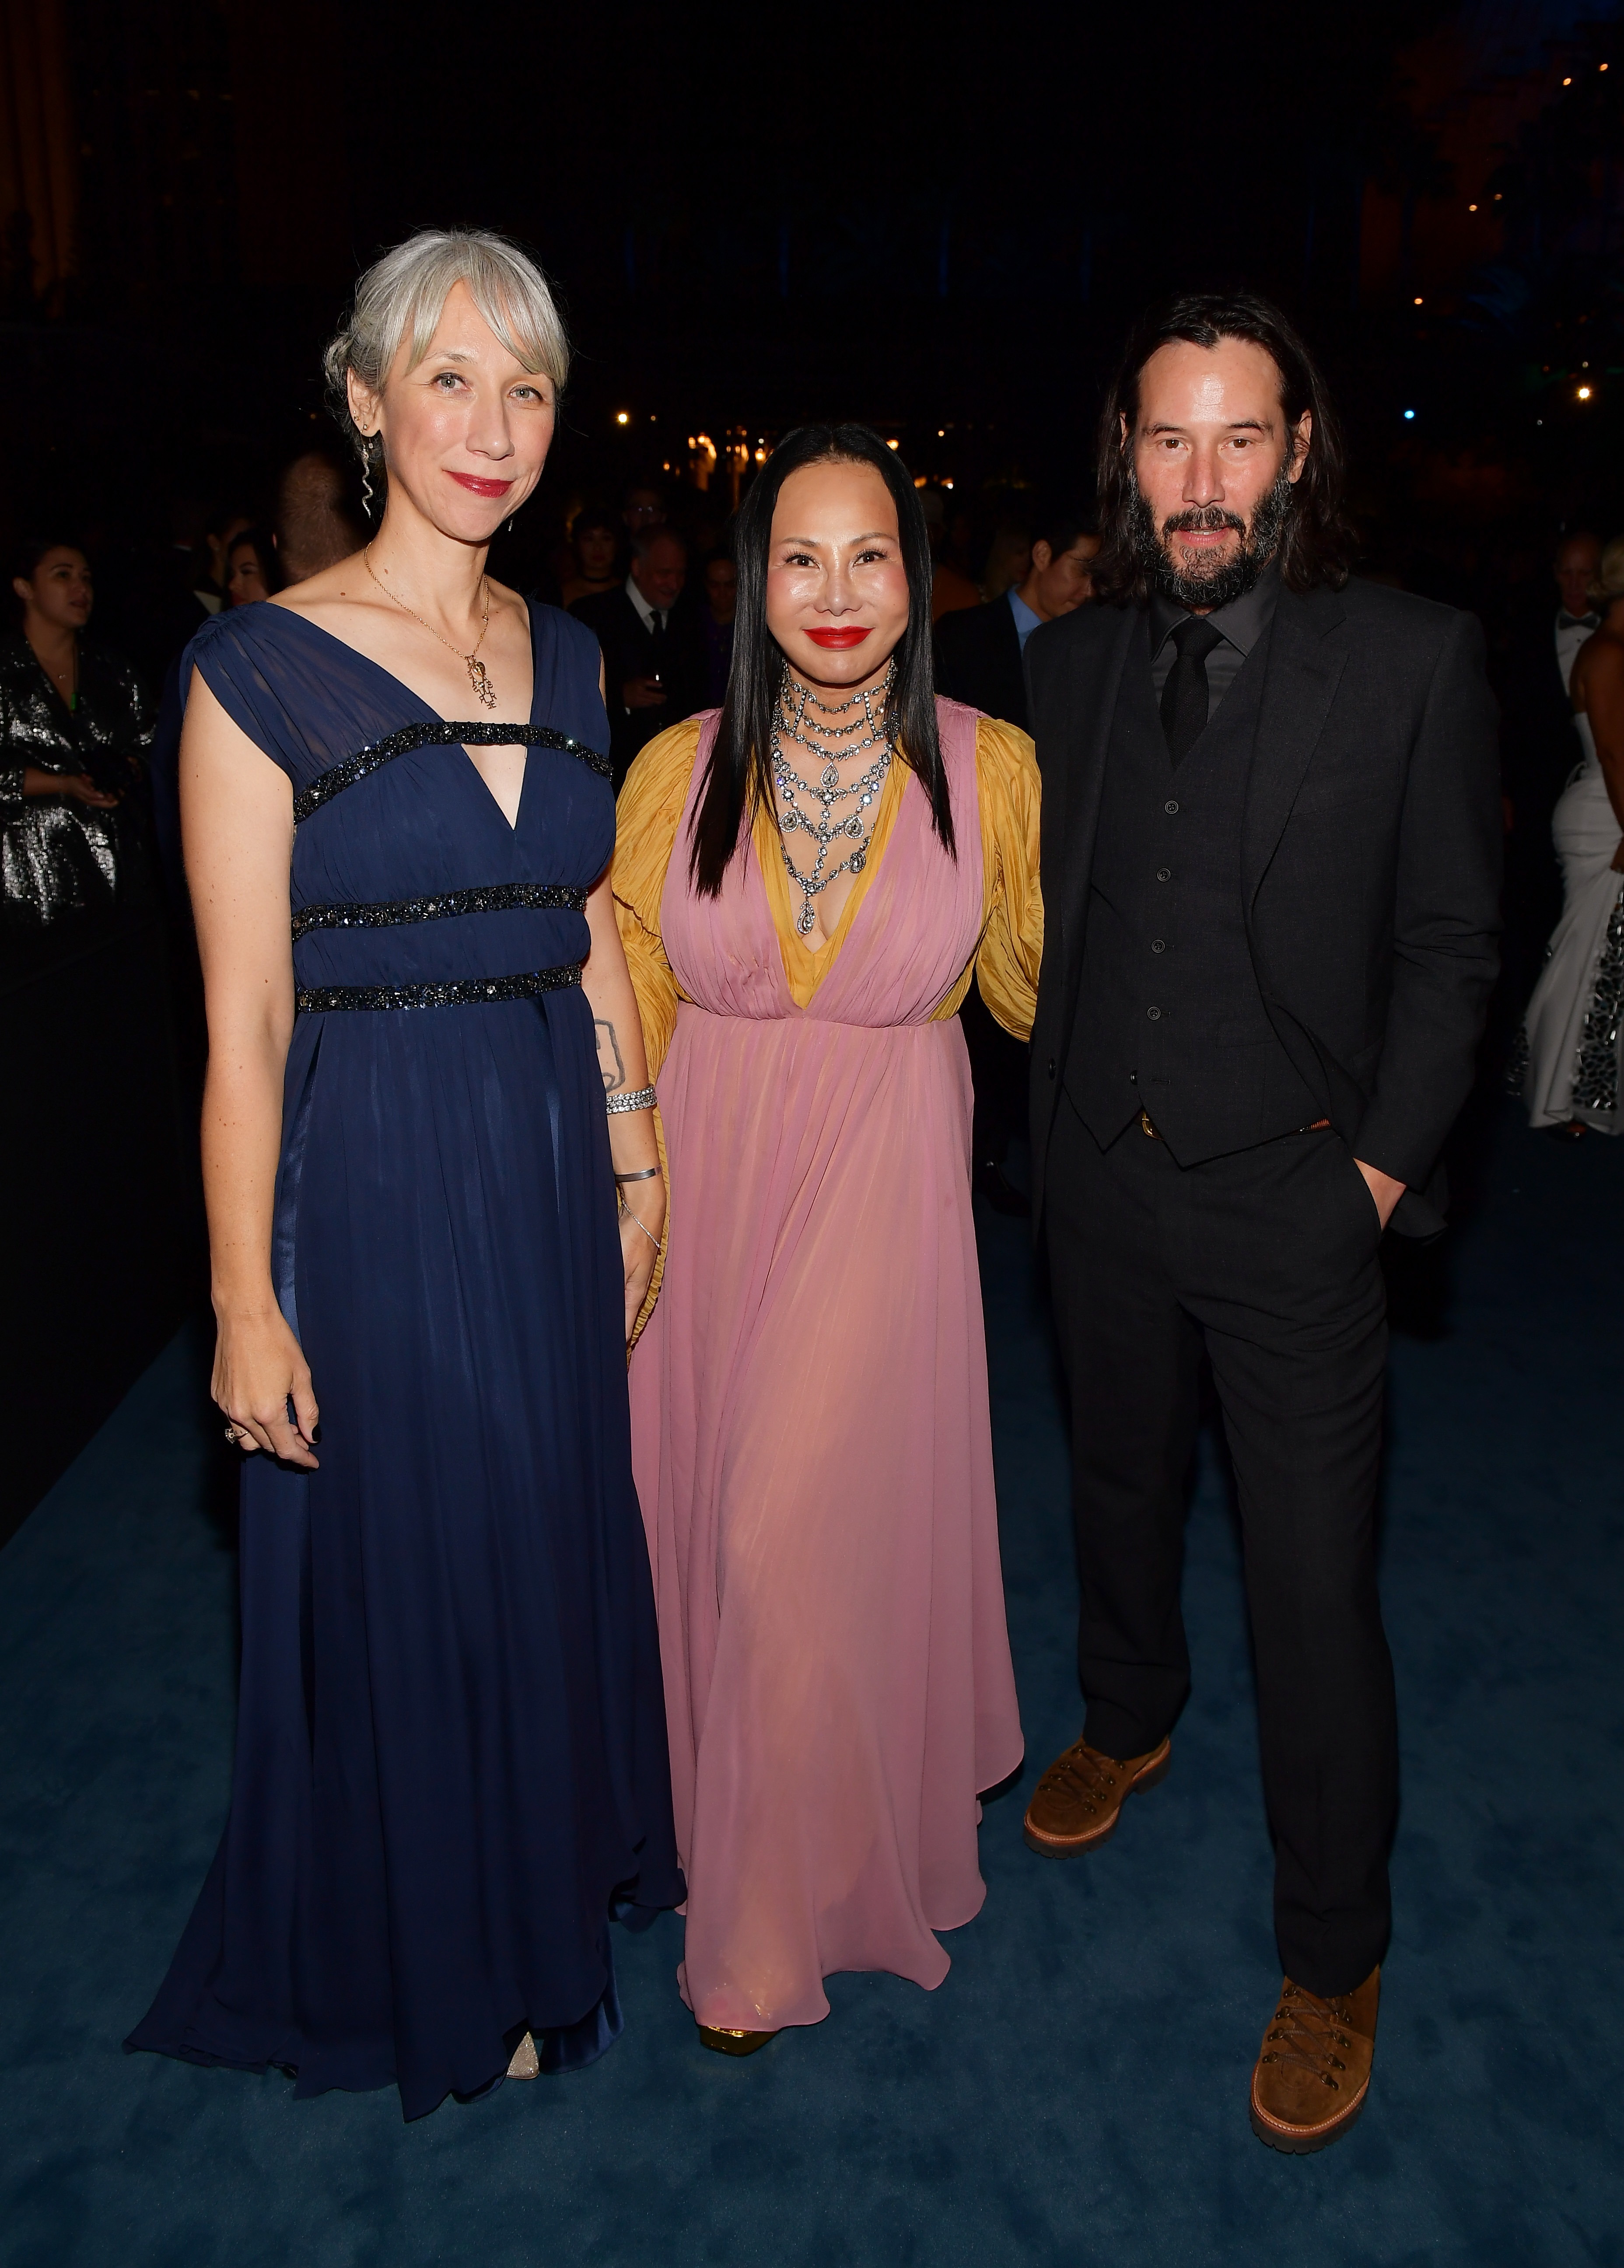 Artist Alexandra Grant, Gala Co-Chair and LACMA Trustee Eva Chow, and Keanu Reeves, photo by Matt Winkelmeyer/Getty Images for LACMA